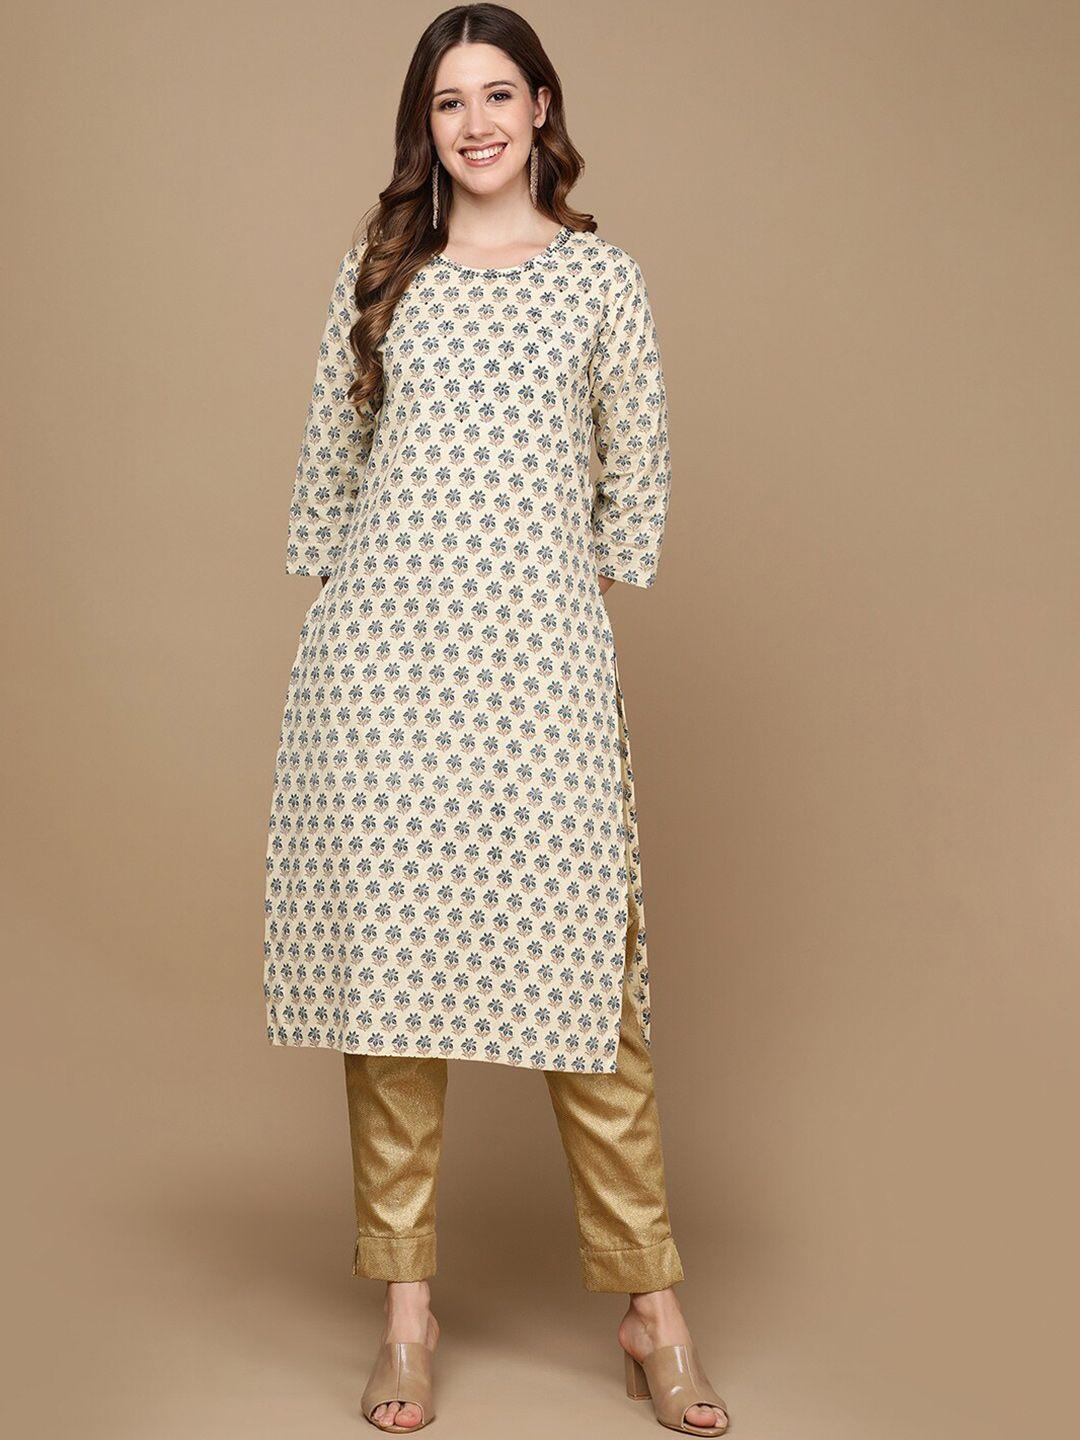 here&now cream-color & teal ethnic motifs printed sequined cotton kurta